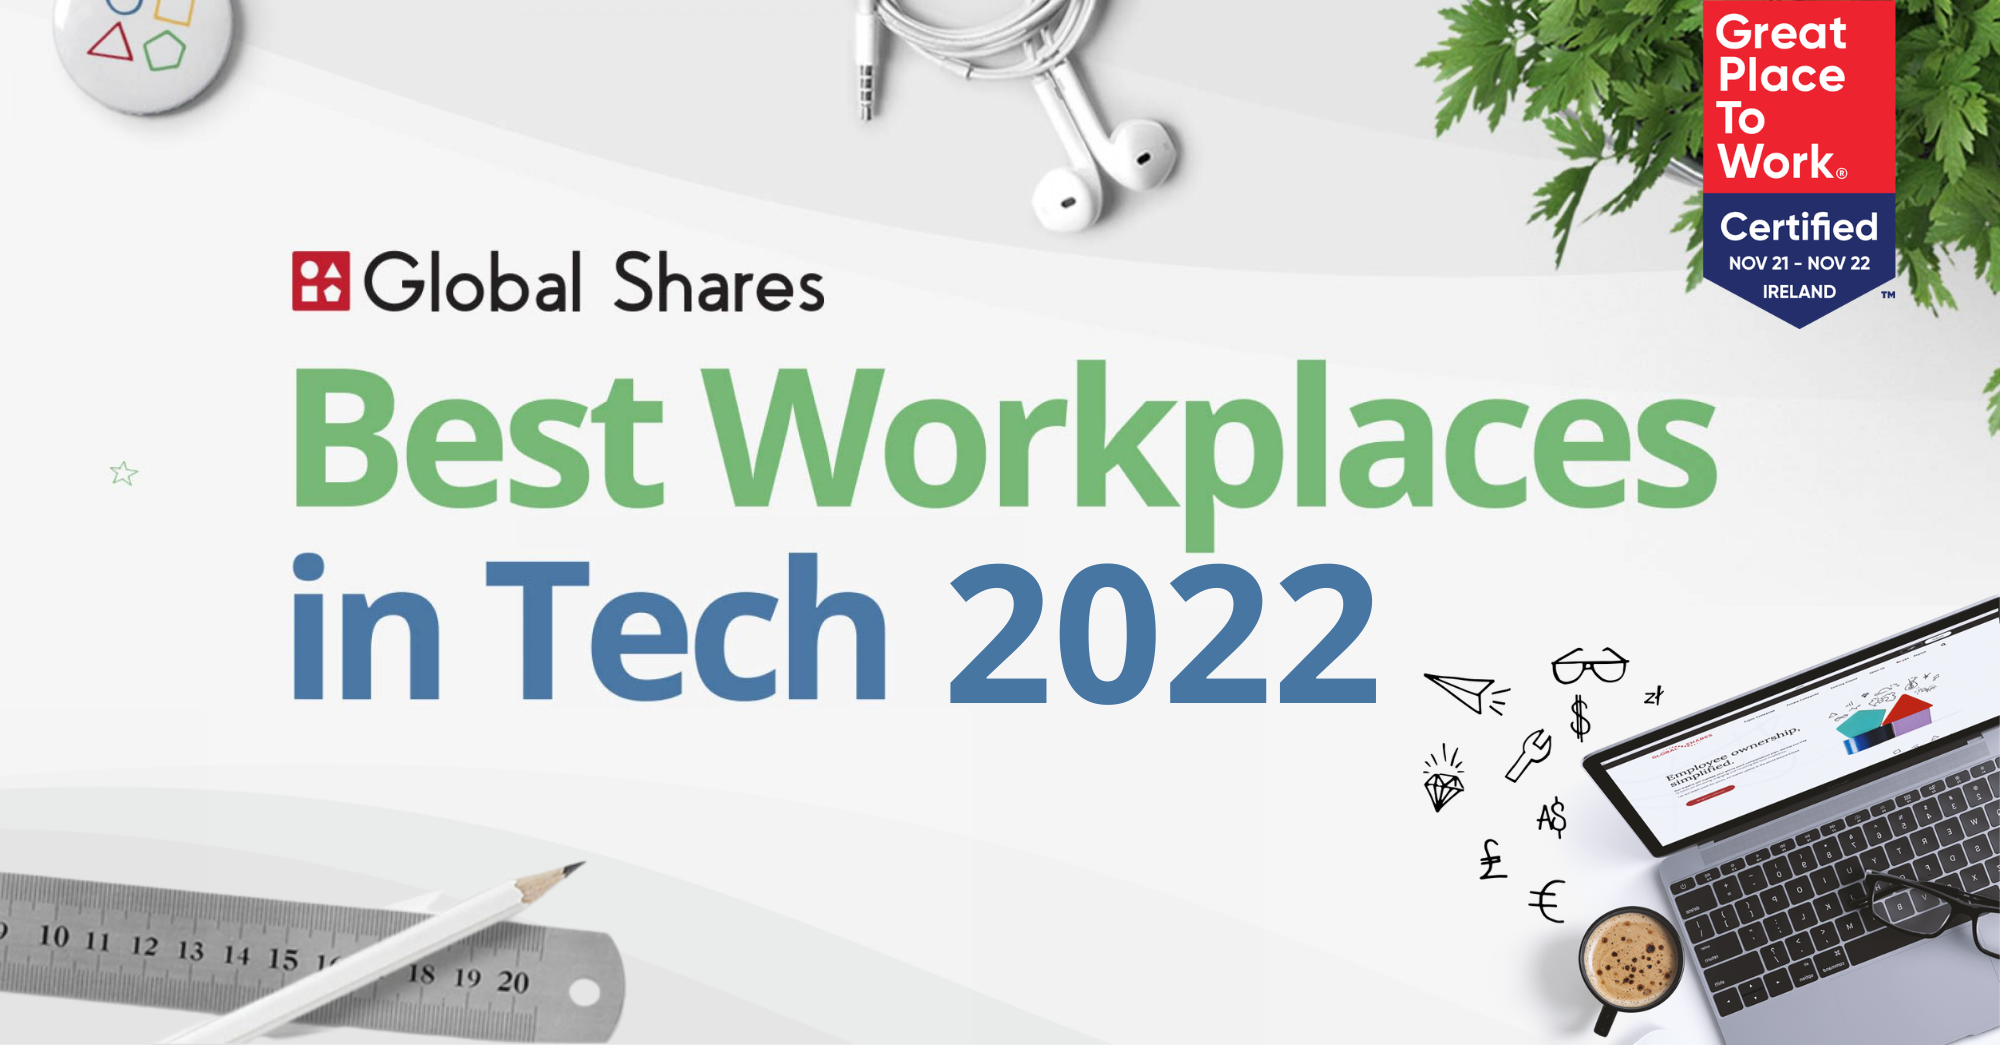 We’re a Best Workplace™ in Tech for the 2nd consecutive year